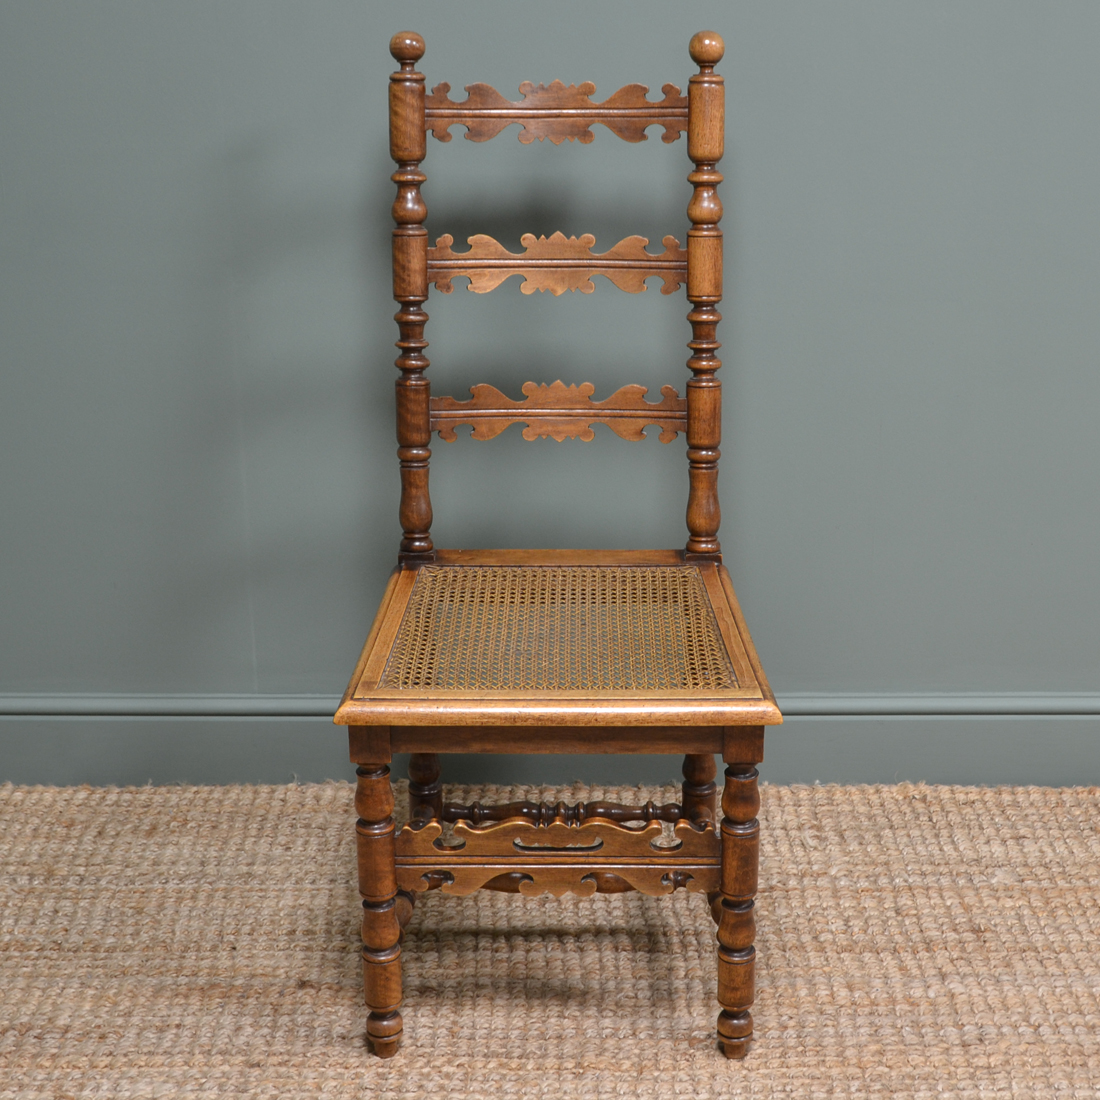 Pair of Fruitwood Antique Ladder Back Chairs - Image 6 of 8